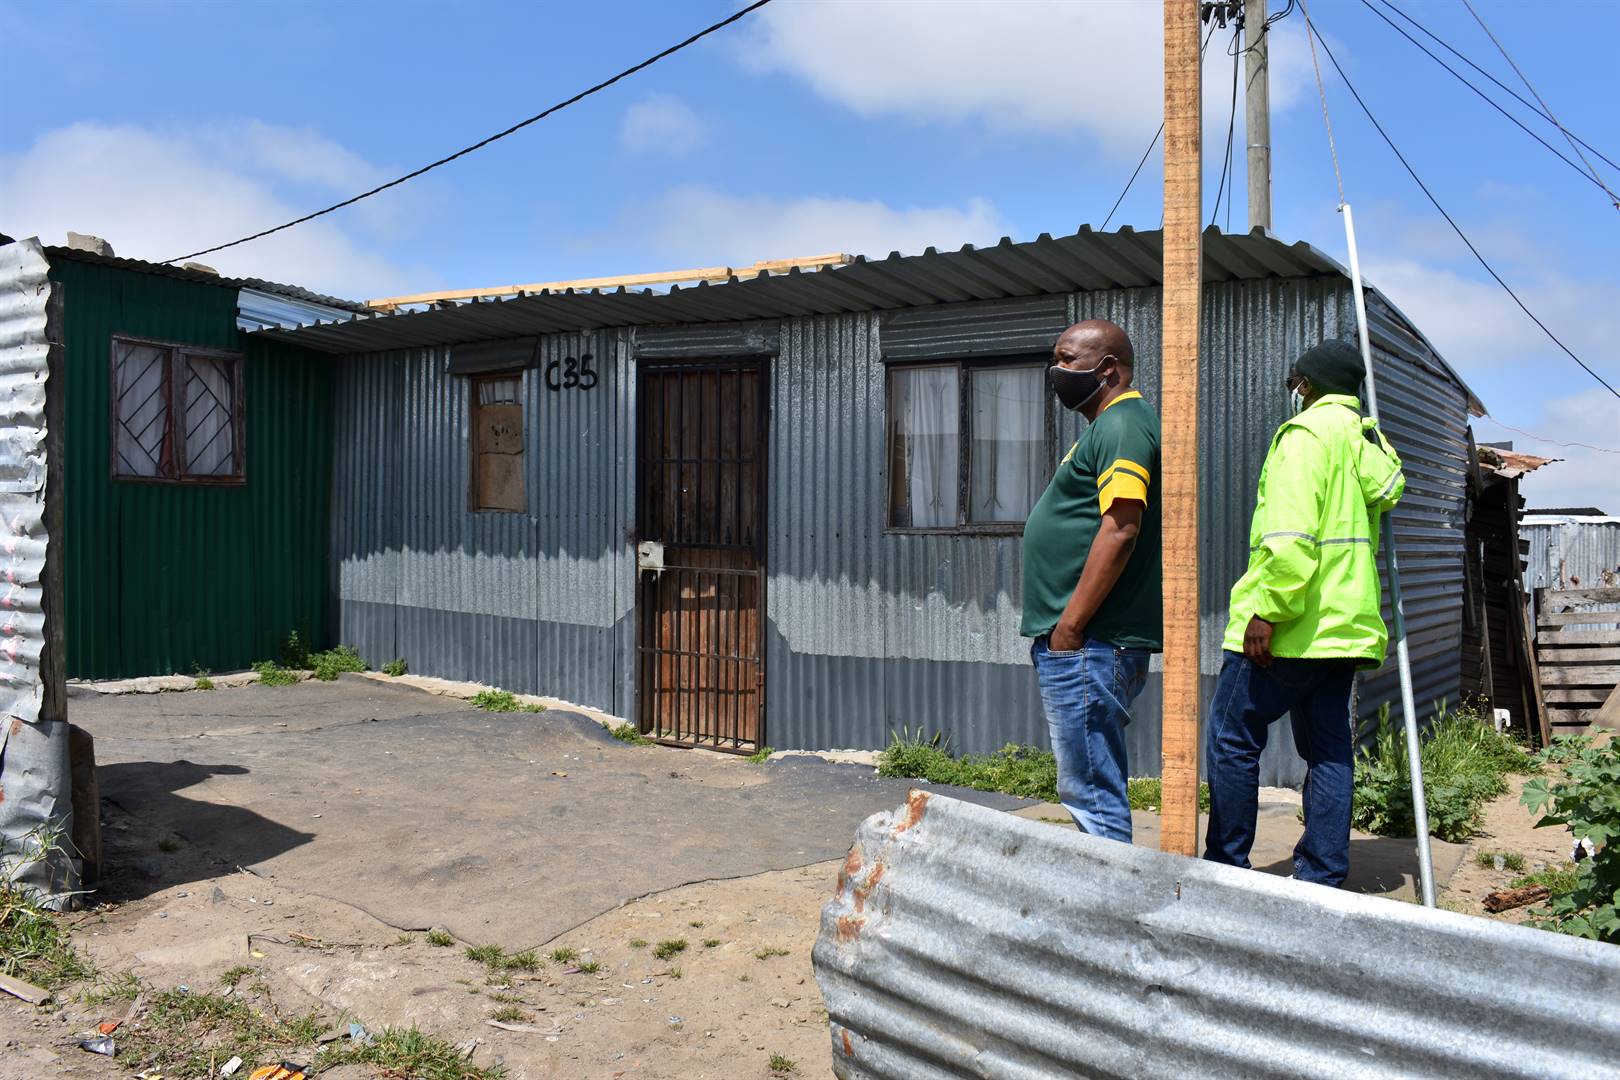 A shack in Barcelona squatter camp in Gugulethu, Cape Town where Chinese women were kept after allegedly being abducted in Delf.Photo by Buziwe Nocuze